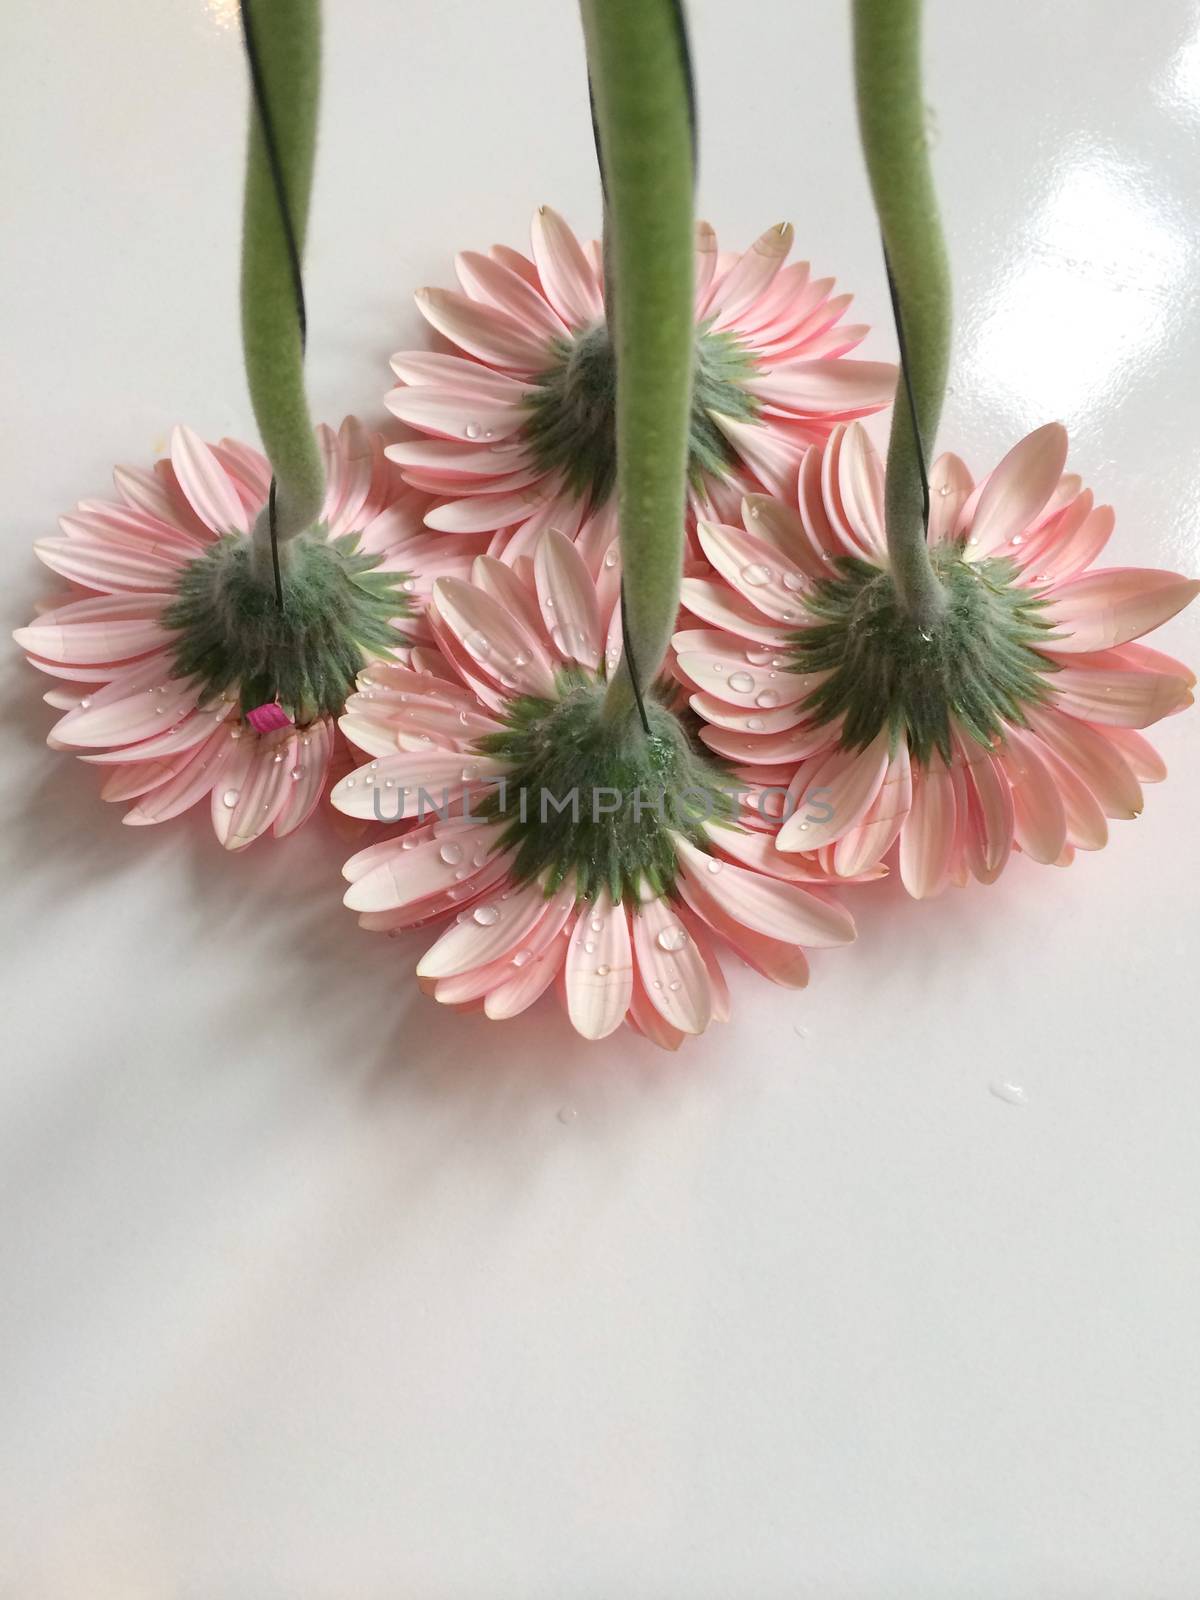 Upside down pink daisies by mmm